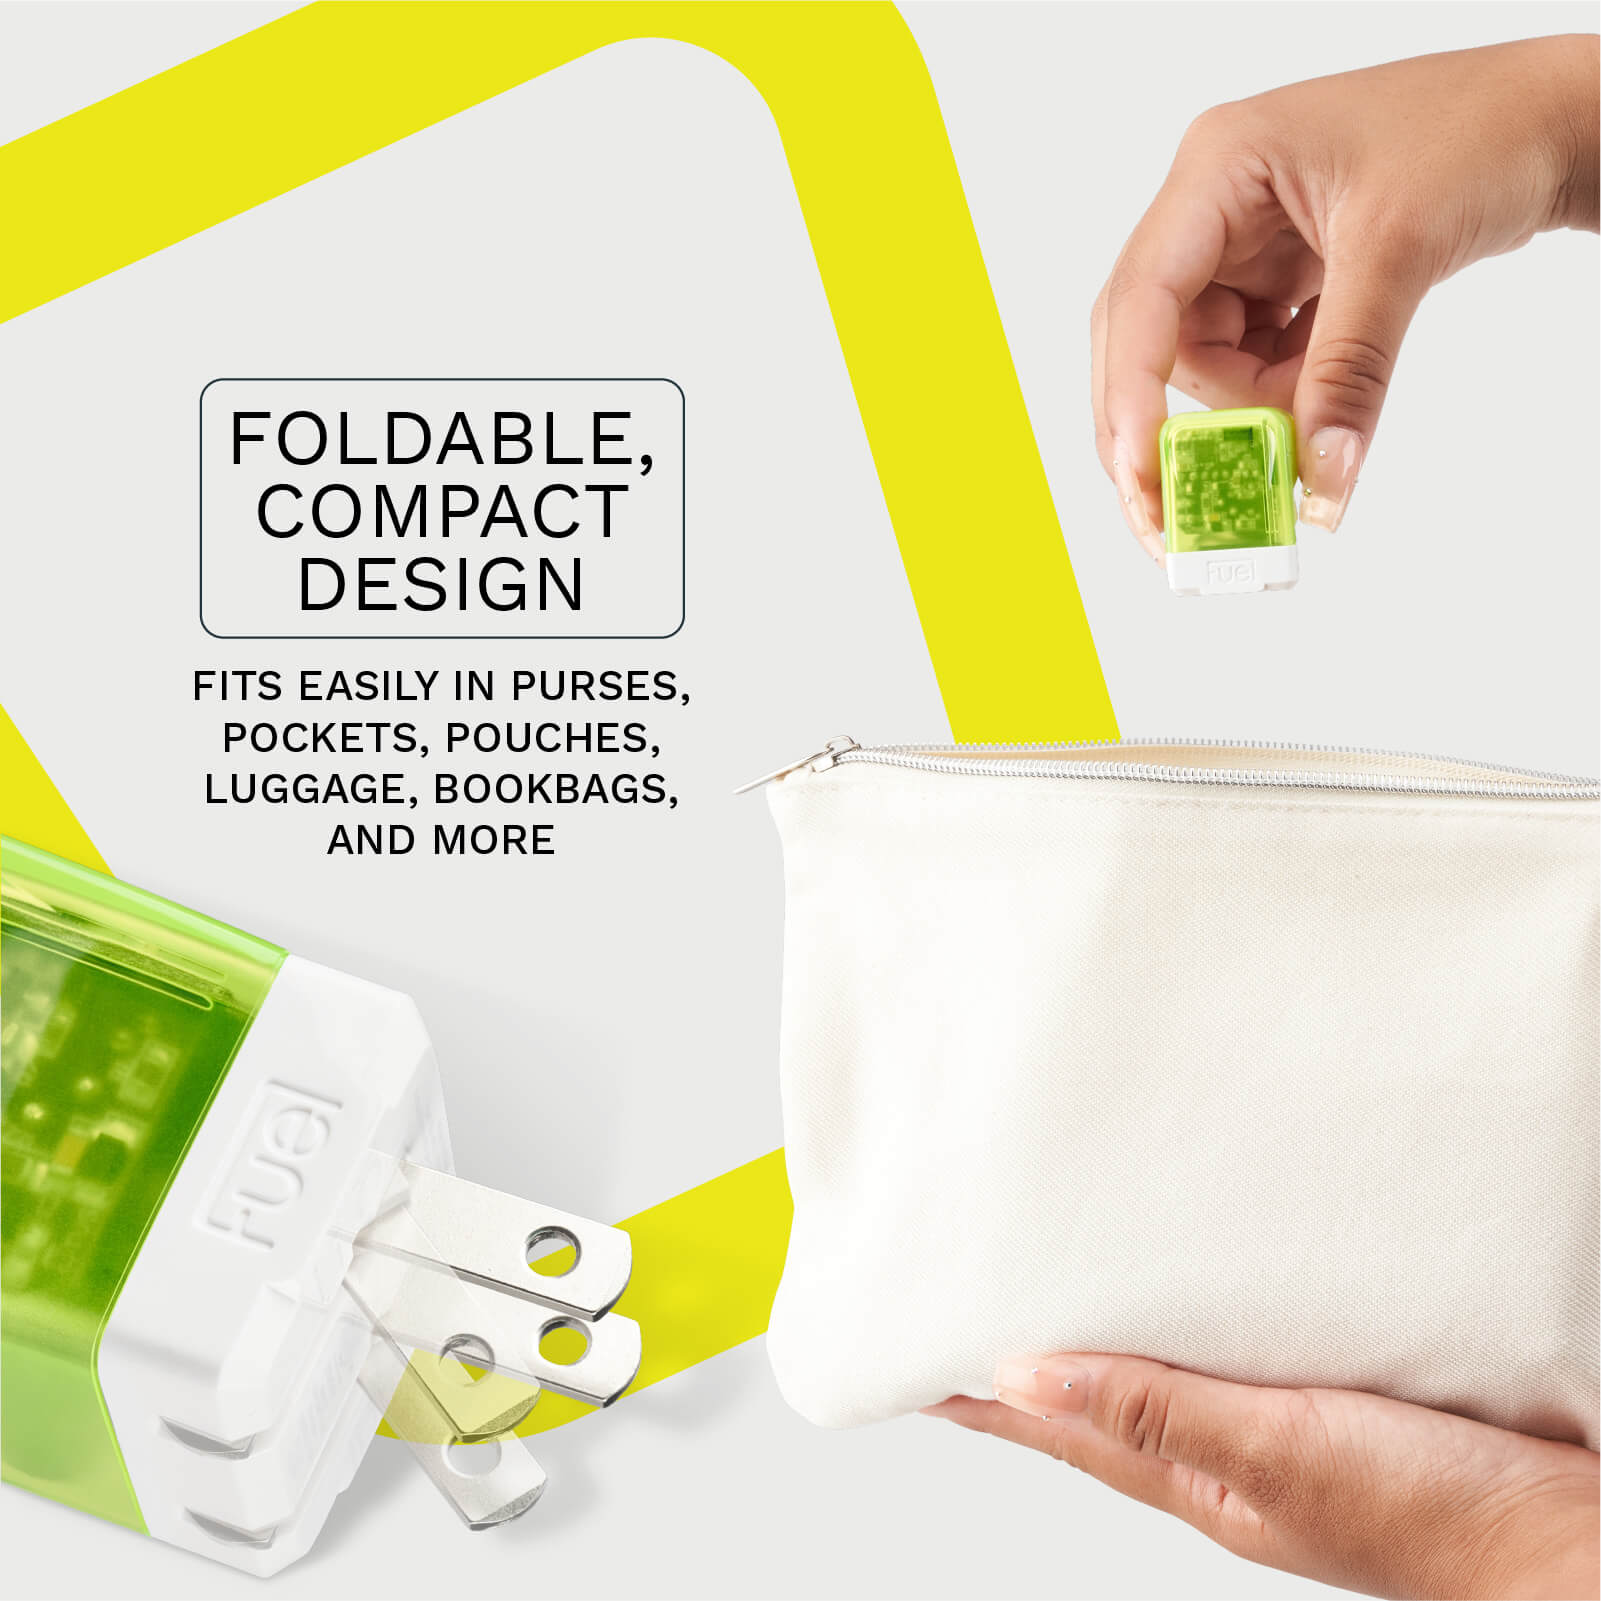 FOLDABLE, COMPACT DESIGN. FITS EASILY IN PURSES, POCKETS, POUCHES, LUGGAGE, BOOKBAGS, AND MORE color::Vivid Green